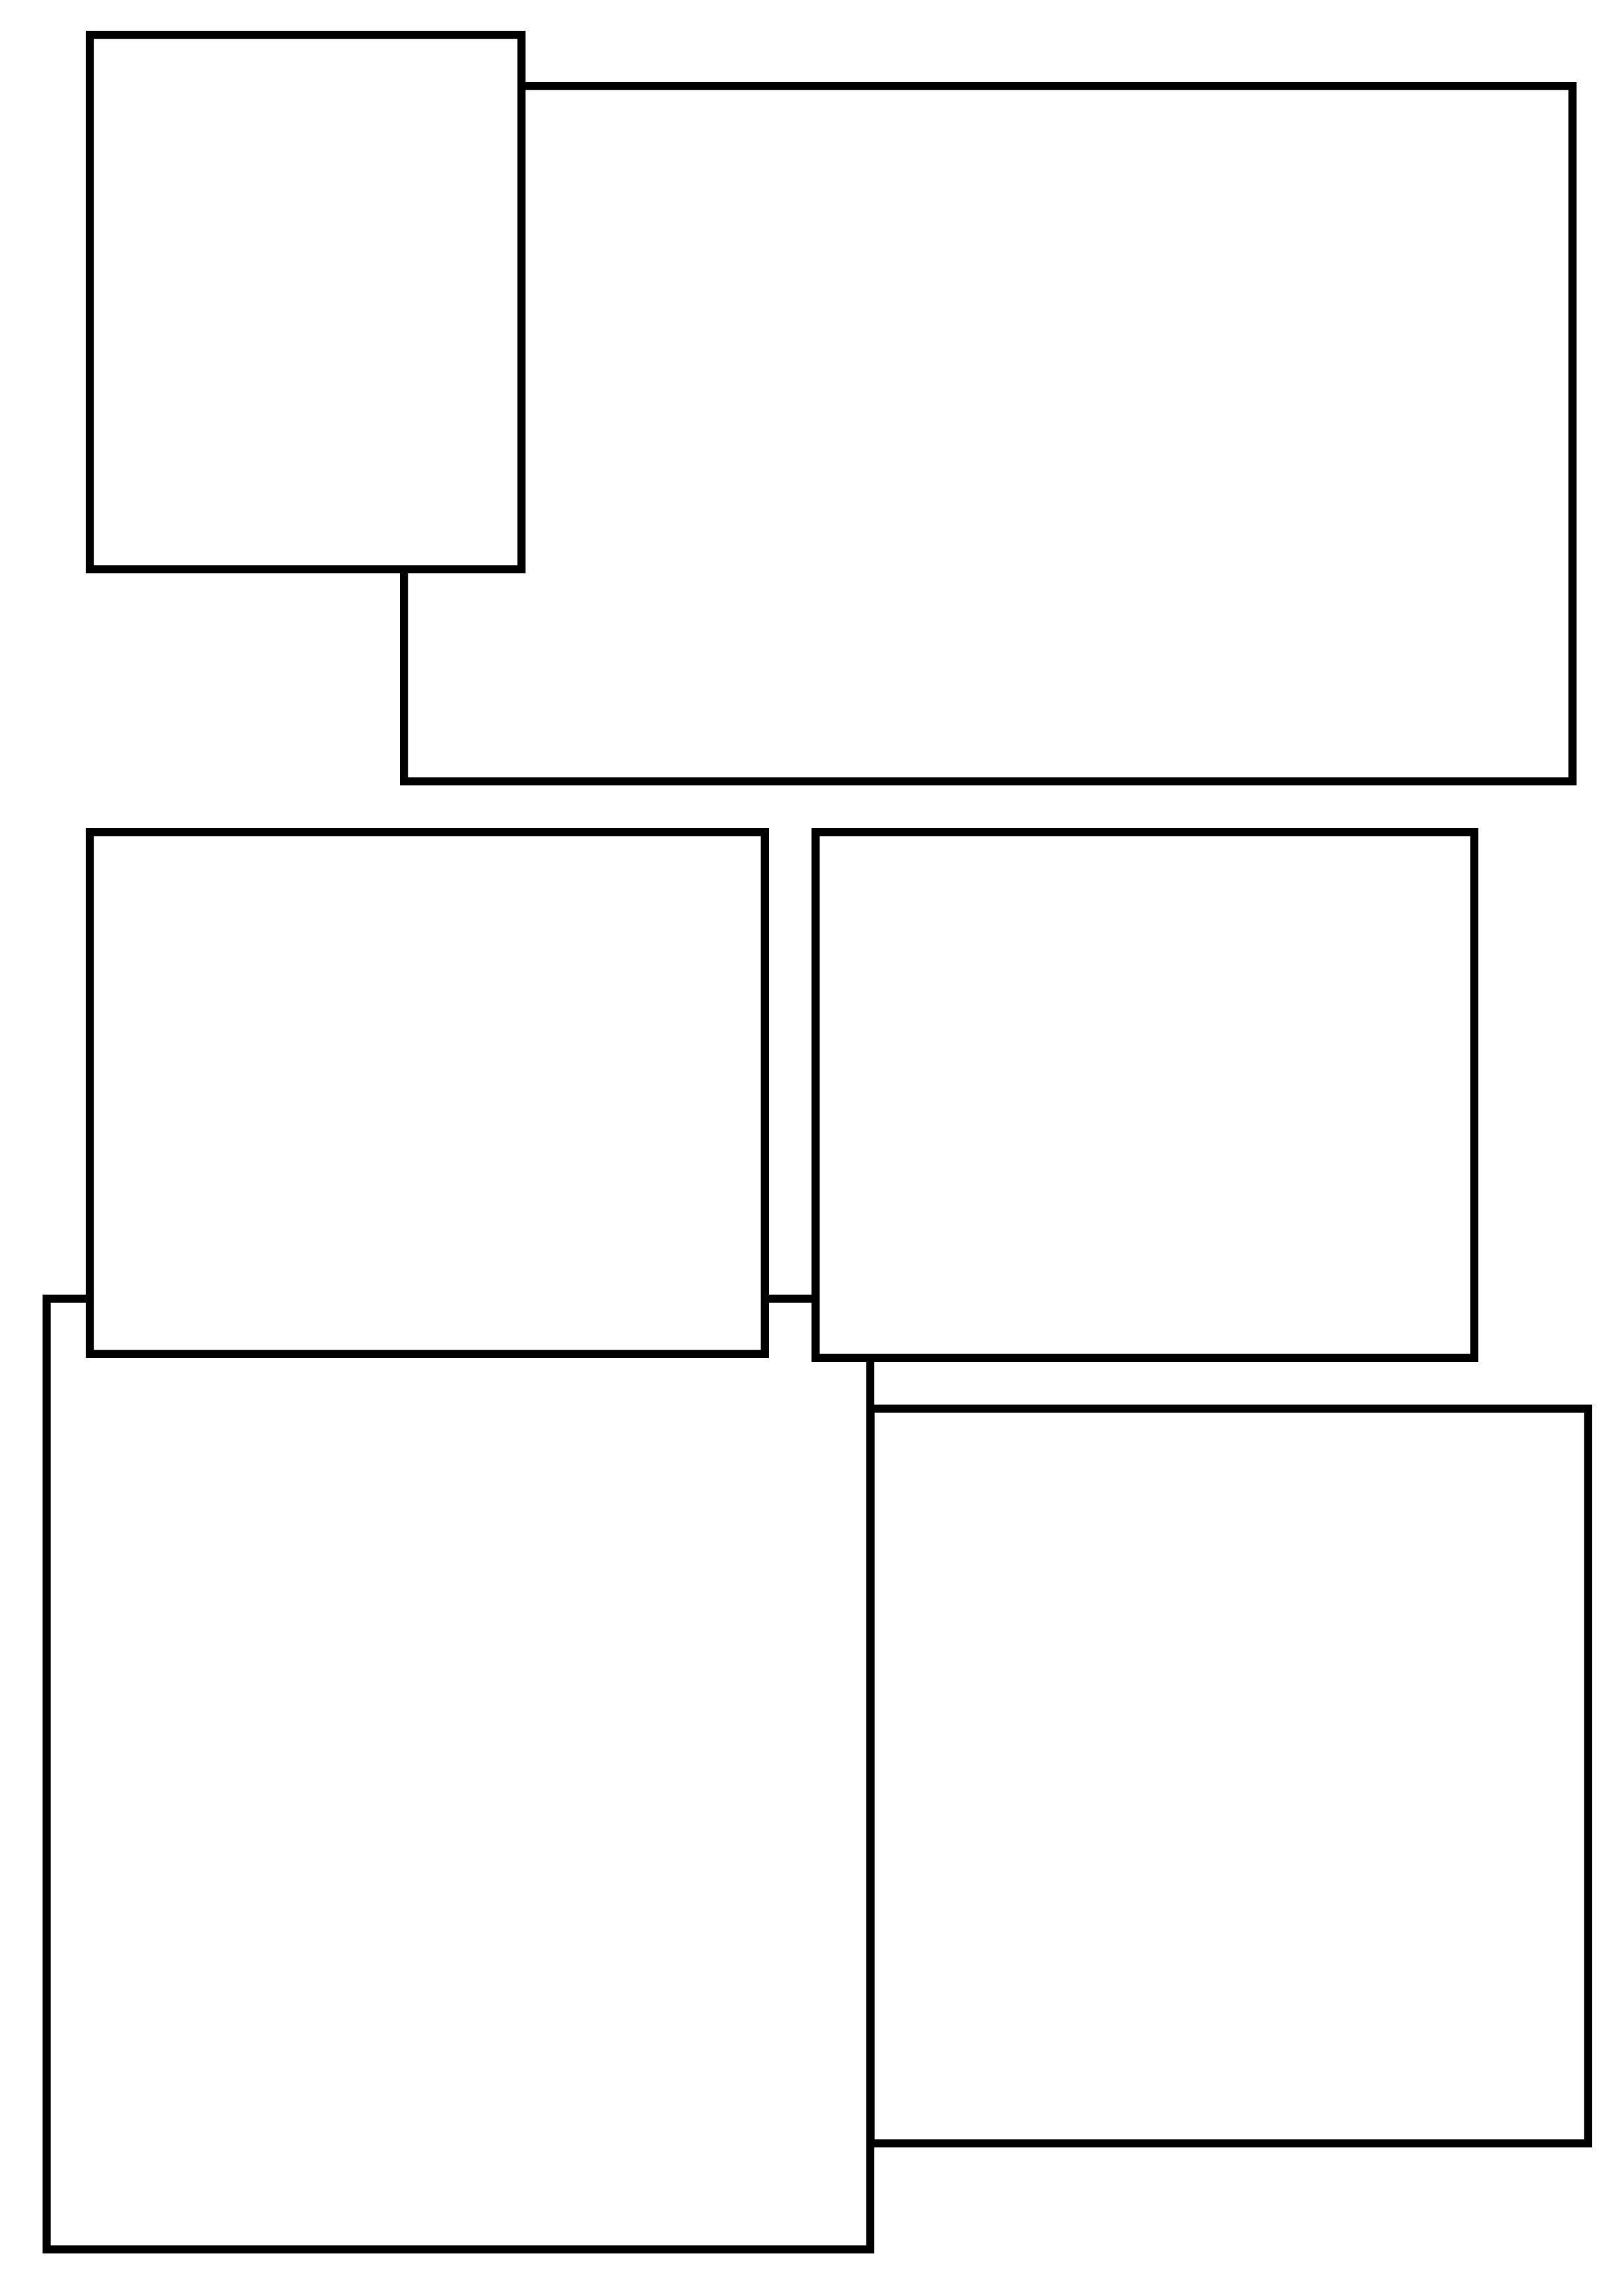 Comic Book Panel Template Setting Out Layouts for the Ic Strip